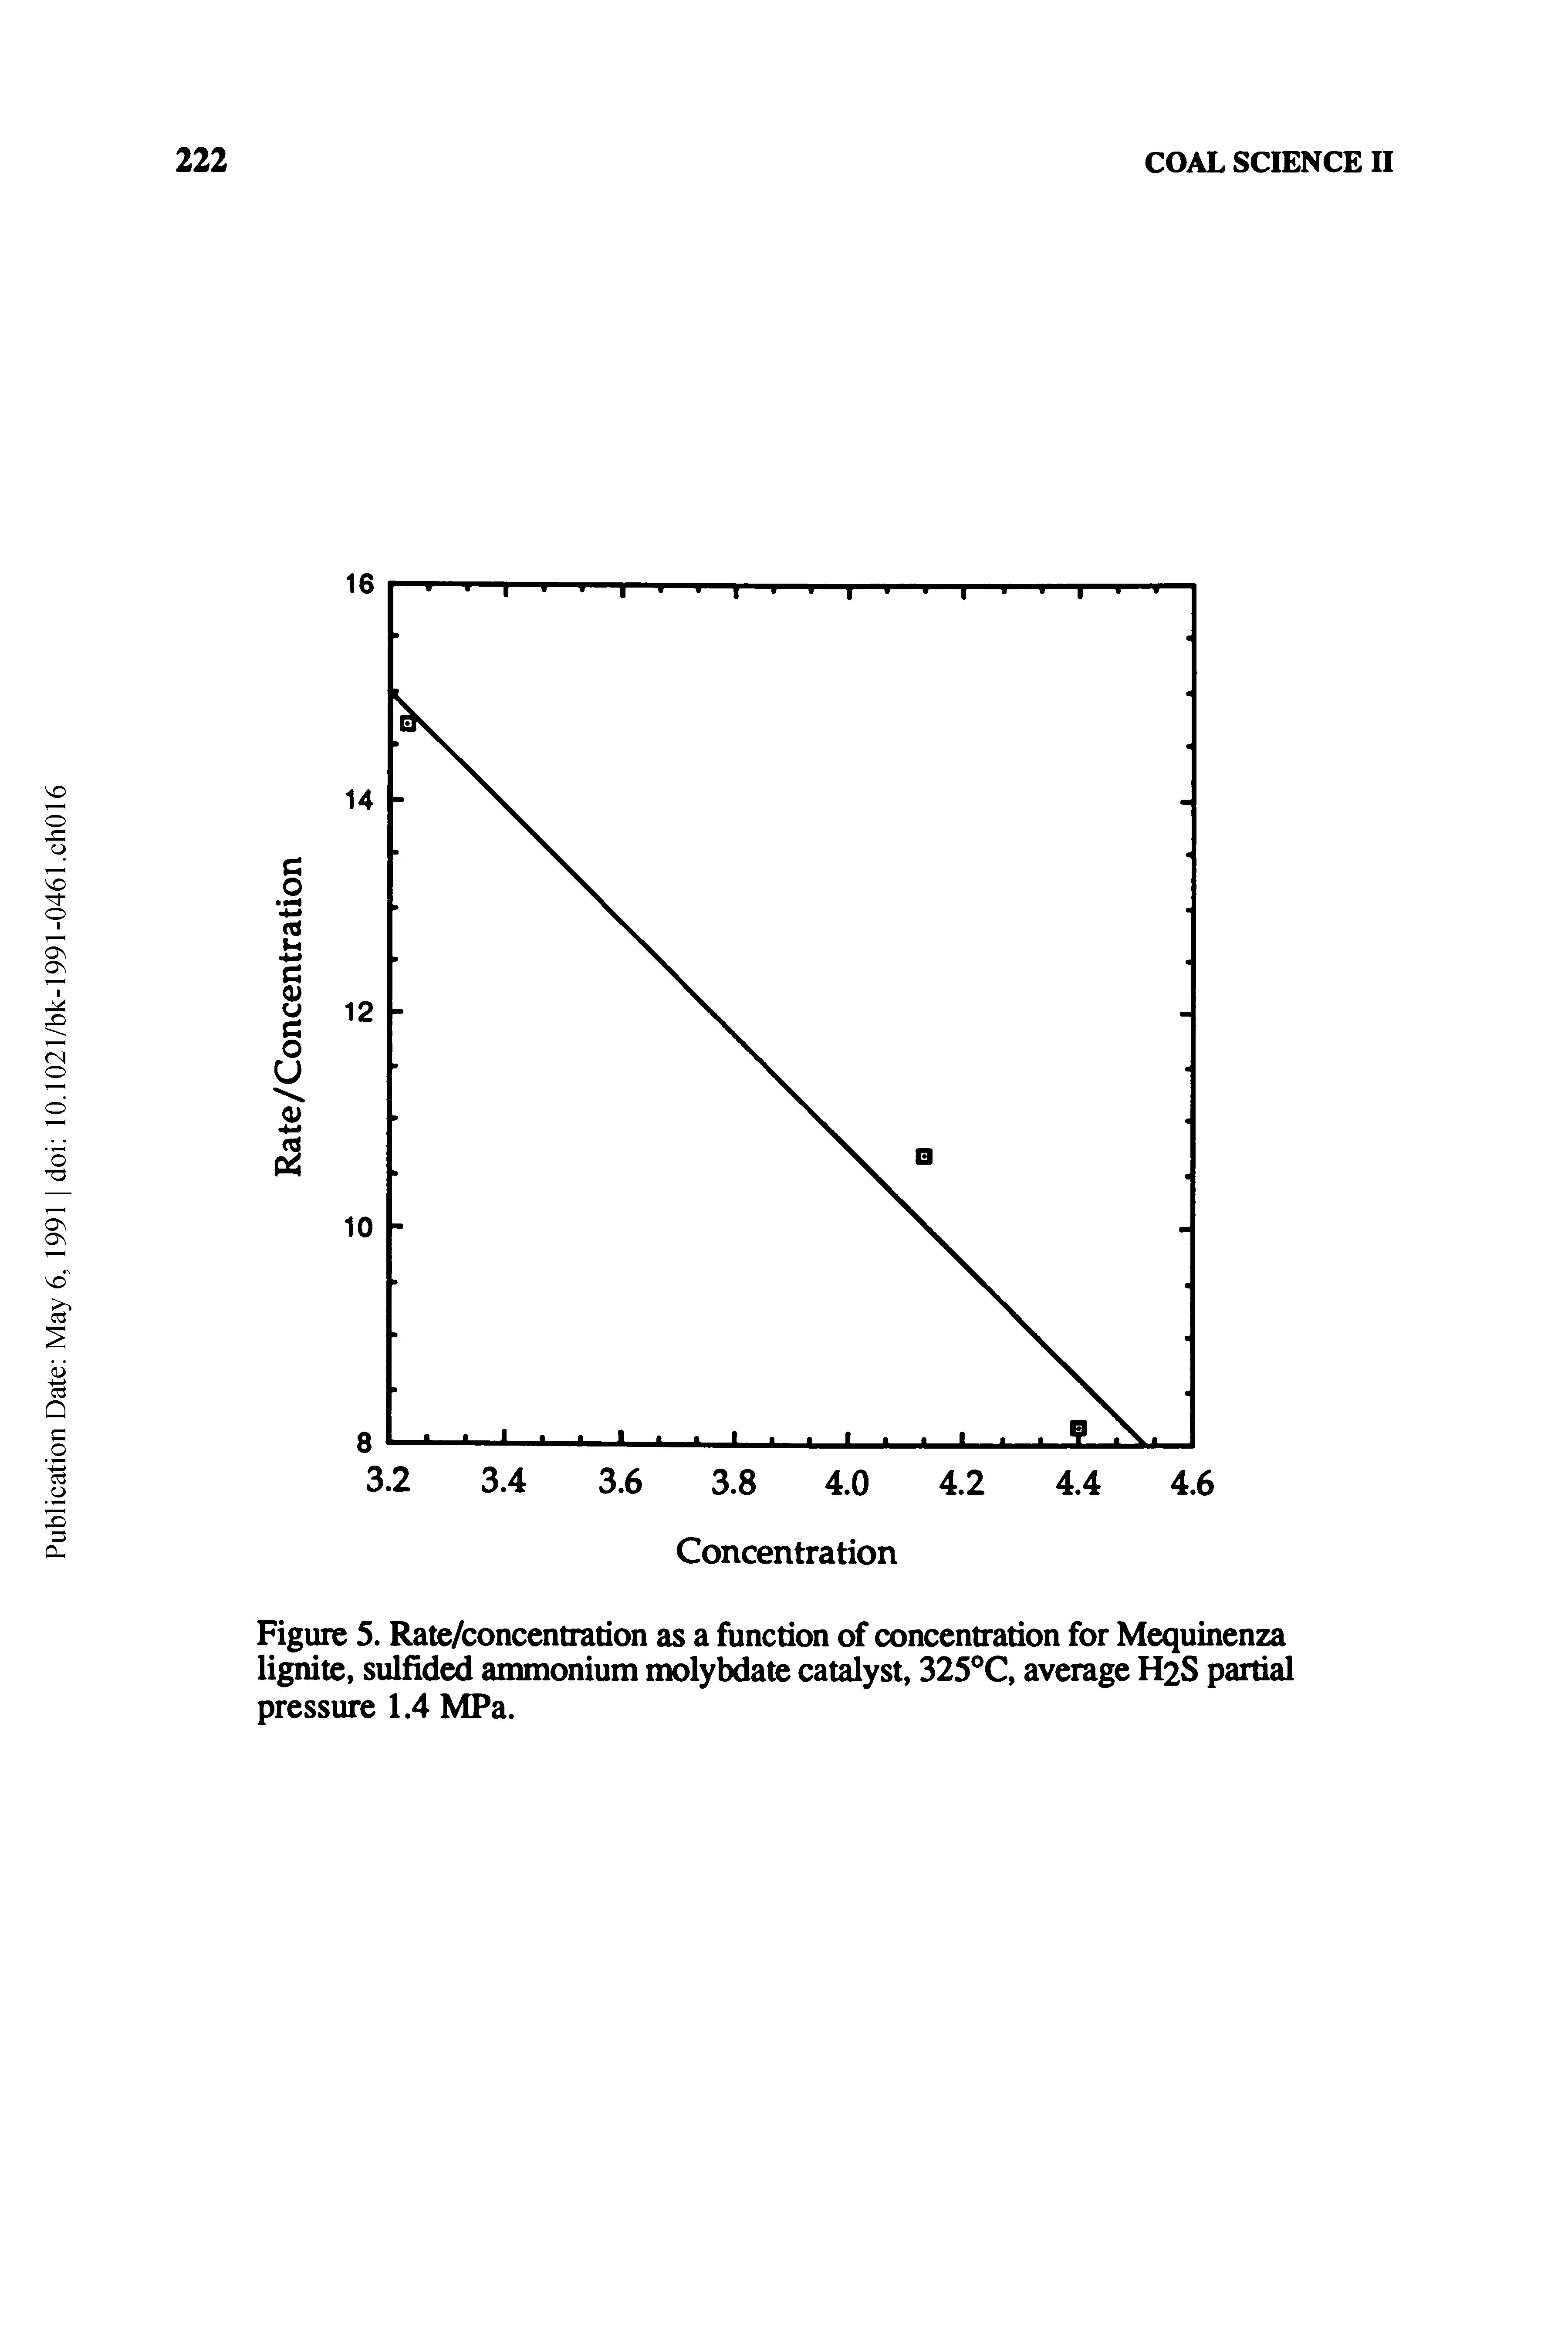 Figure 5. Rate/concentration as a function of concentration for Mequinenza lignite, sulfided ammonium molybdate catalyst, 325°C, average H2S partial pressure 1.4 MPa.